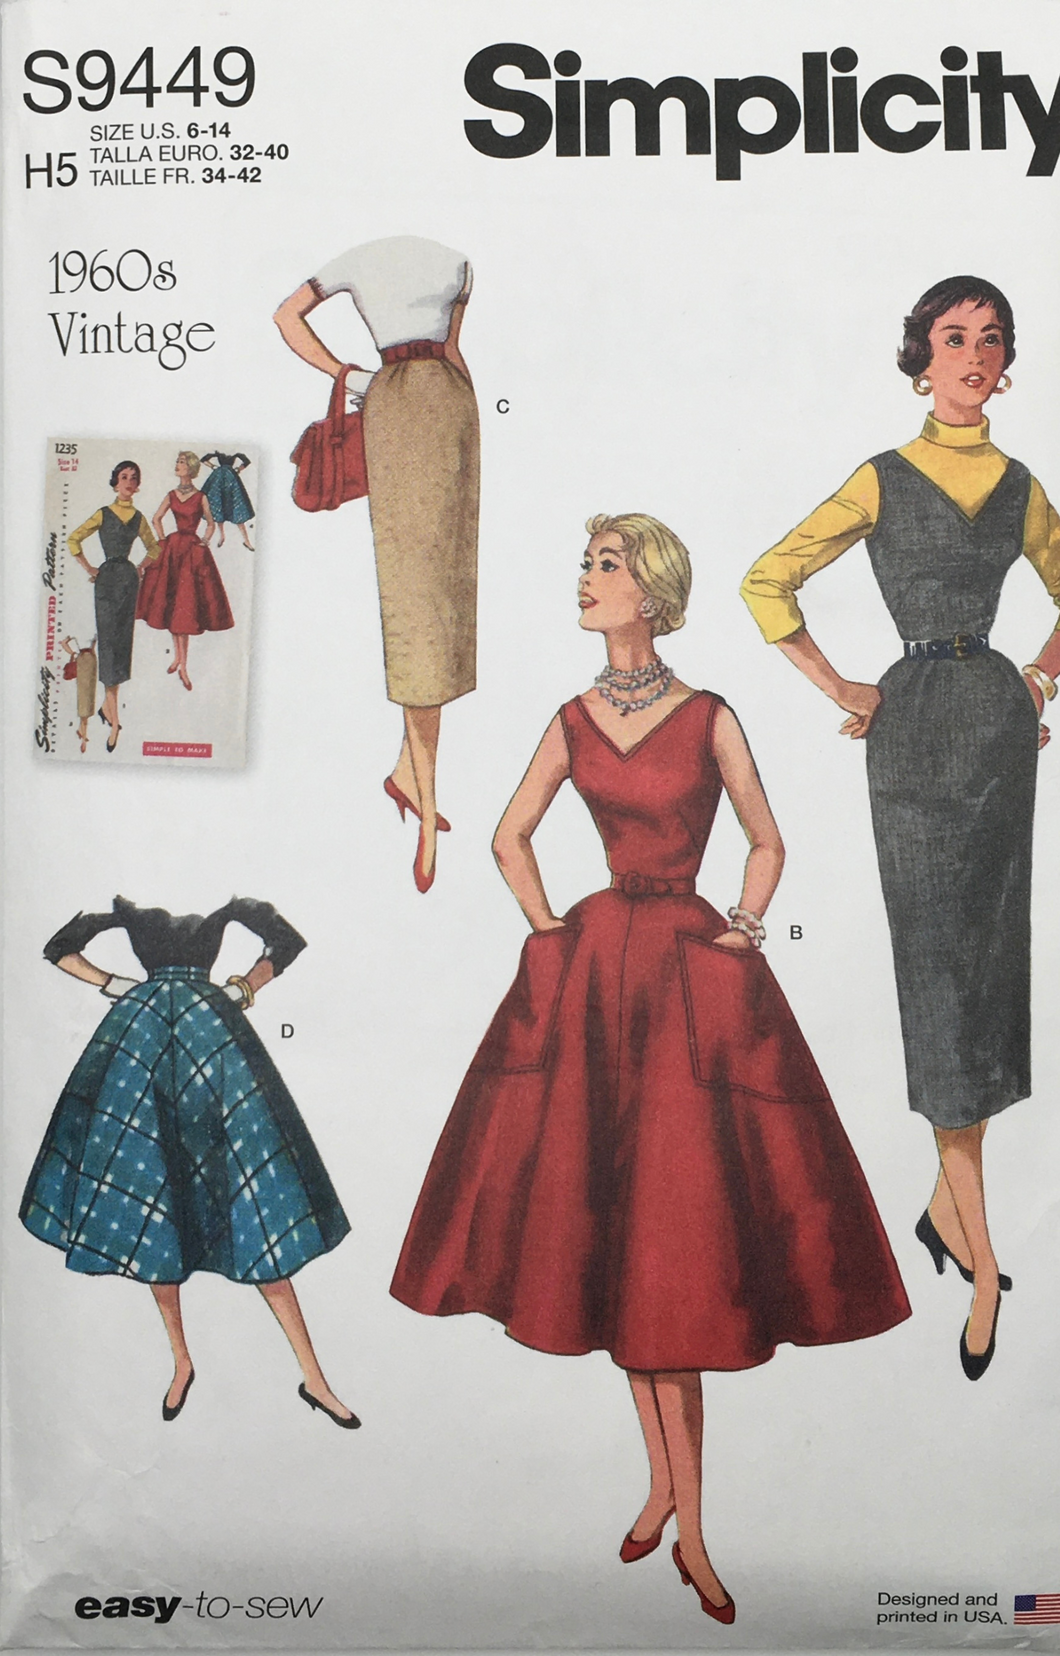 1960’s Reproduction  Sewing Pattern: Simplicity S9449